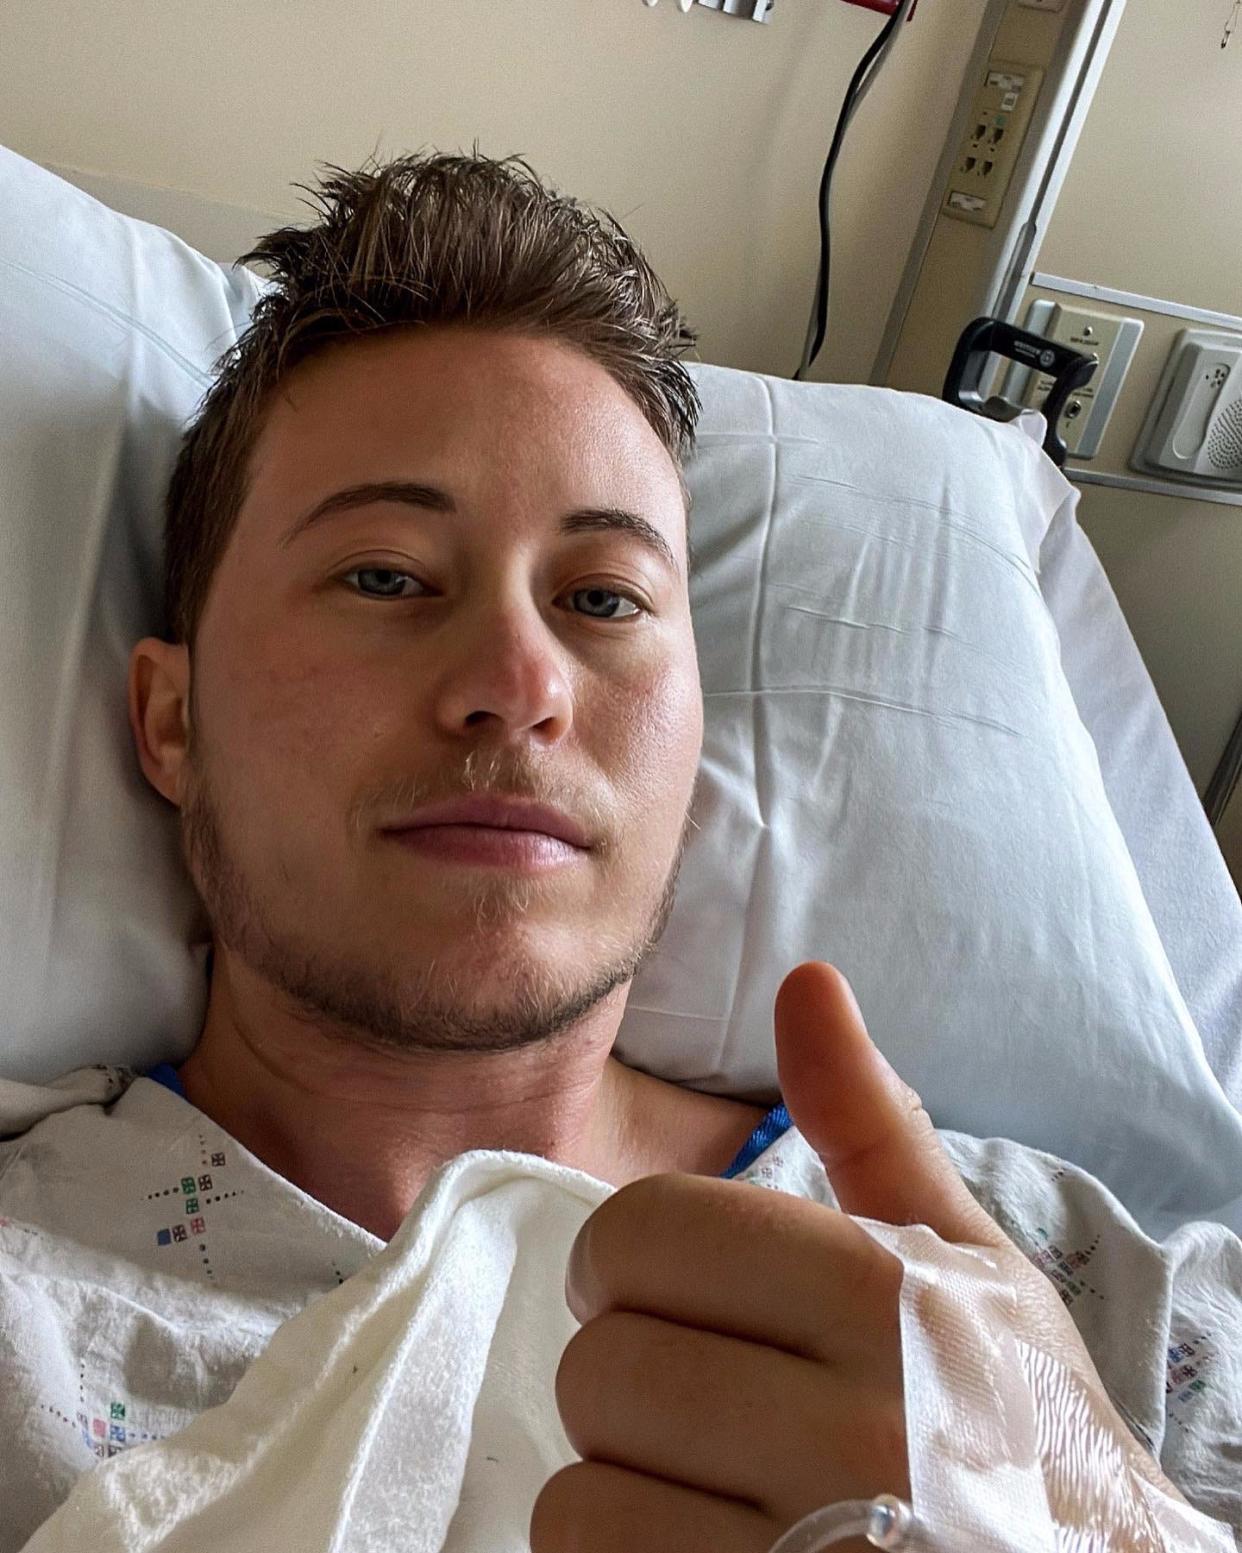 Influencer Luke Pearson from the neck up giving a thumb's up in a hospital bed